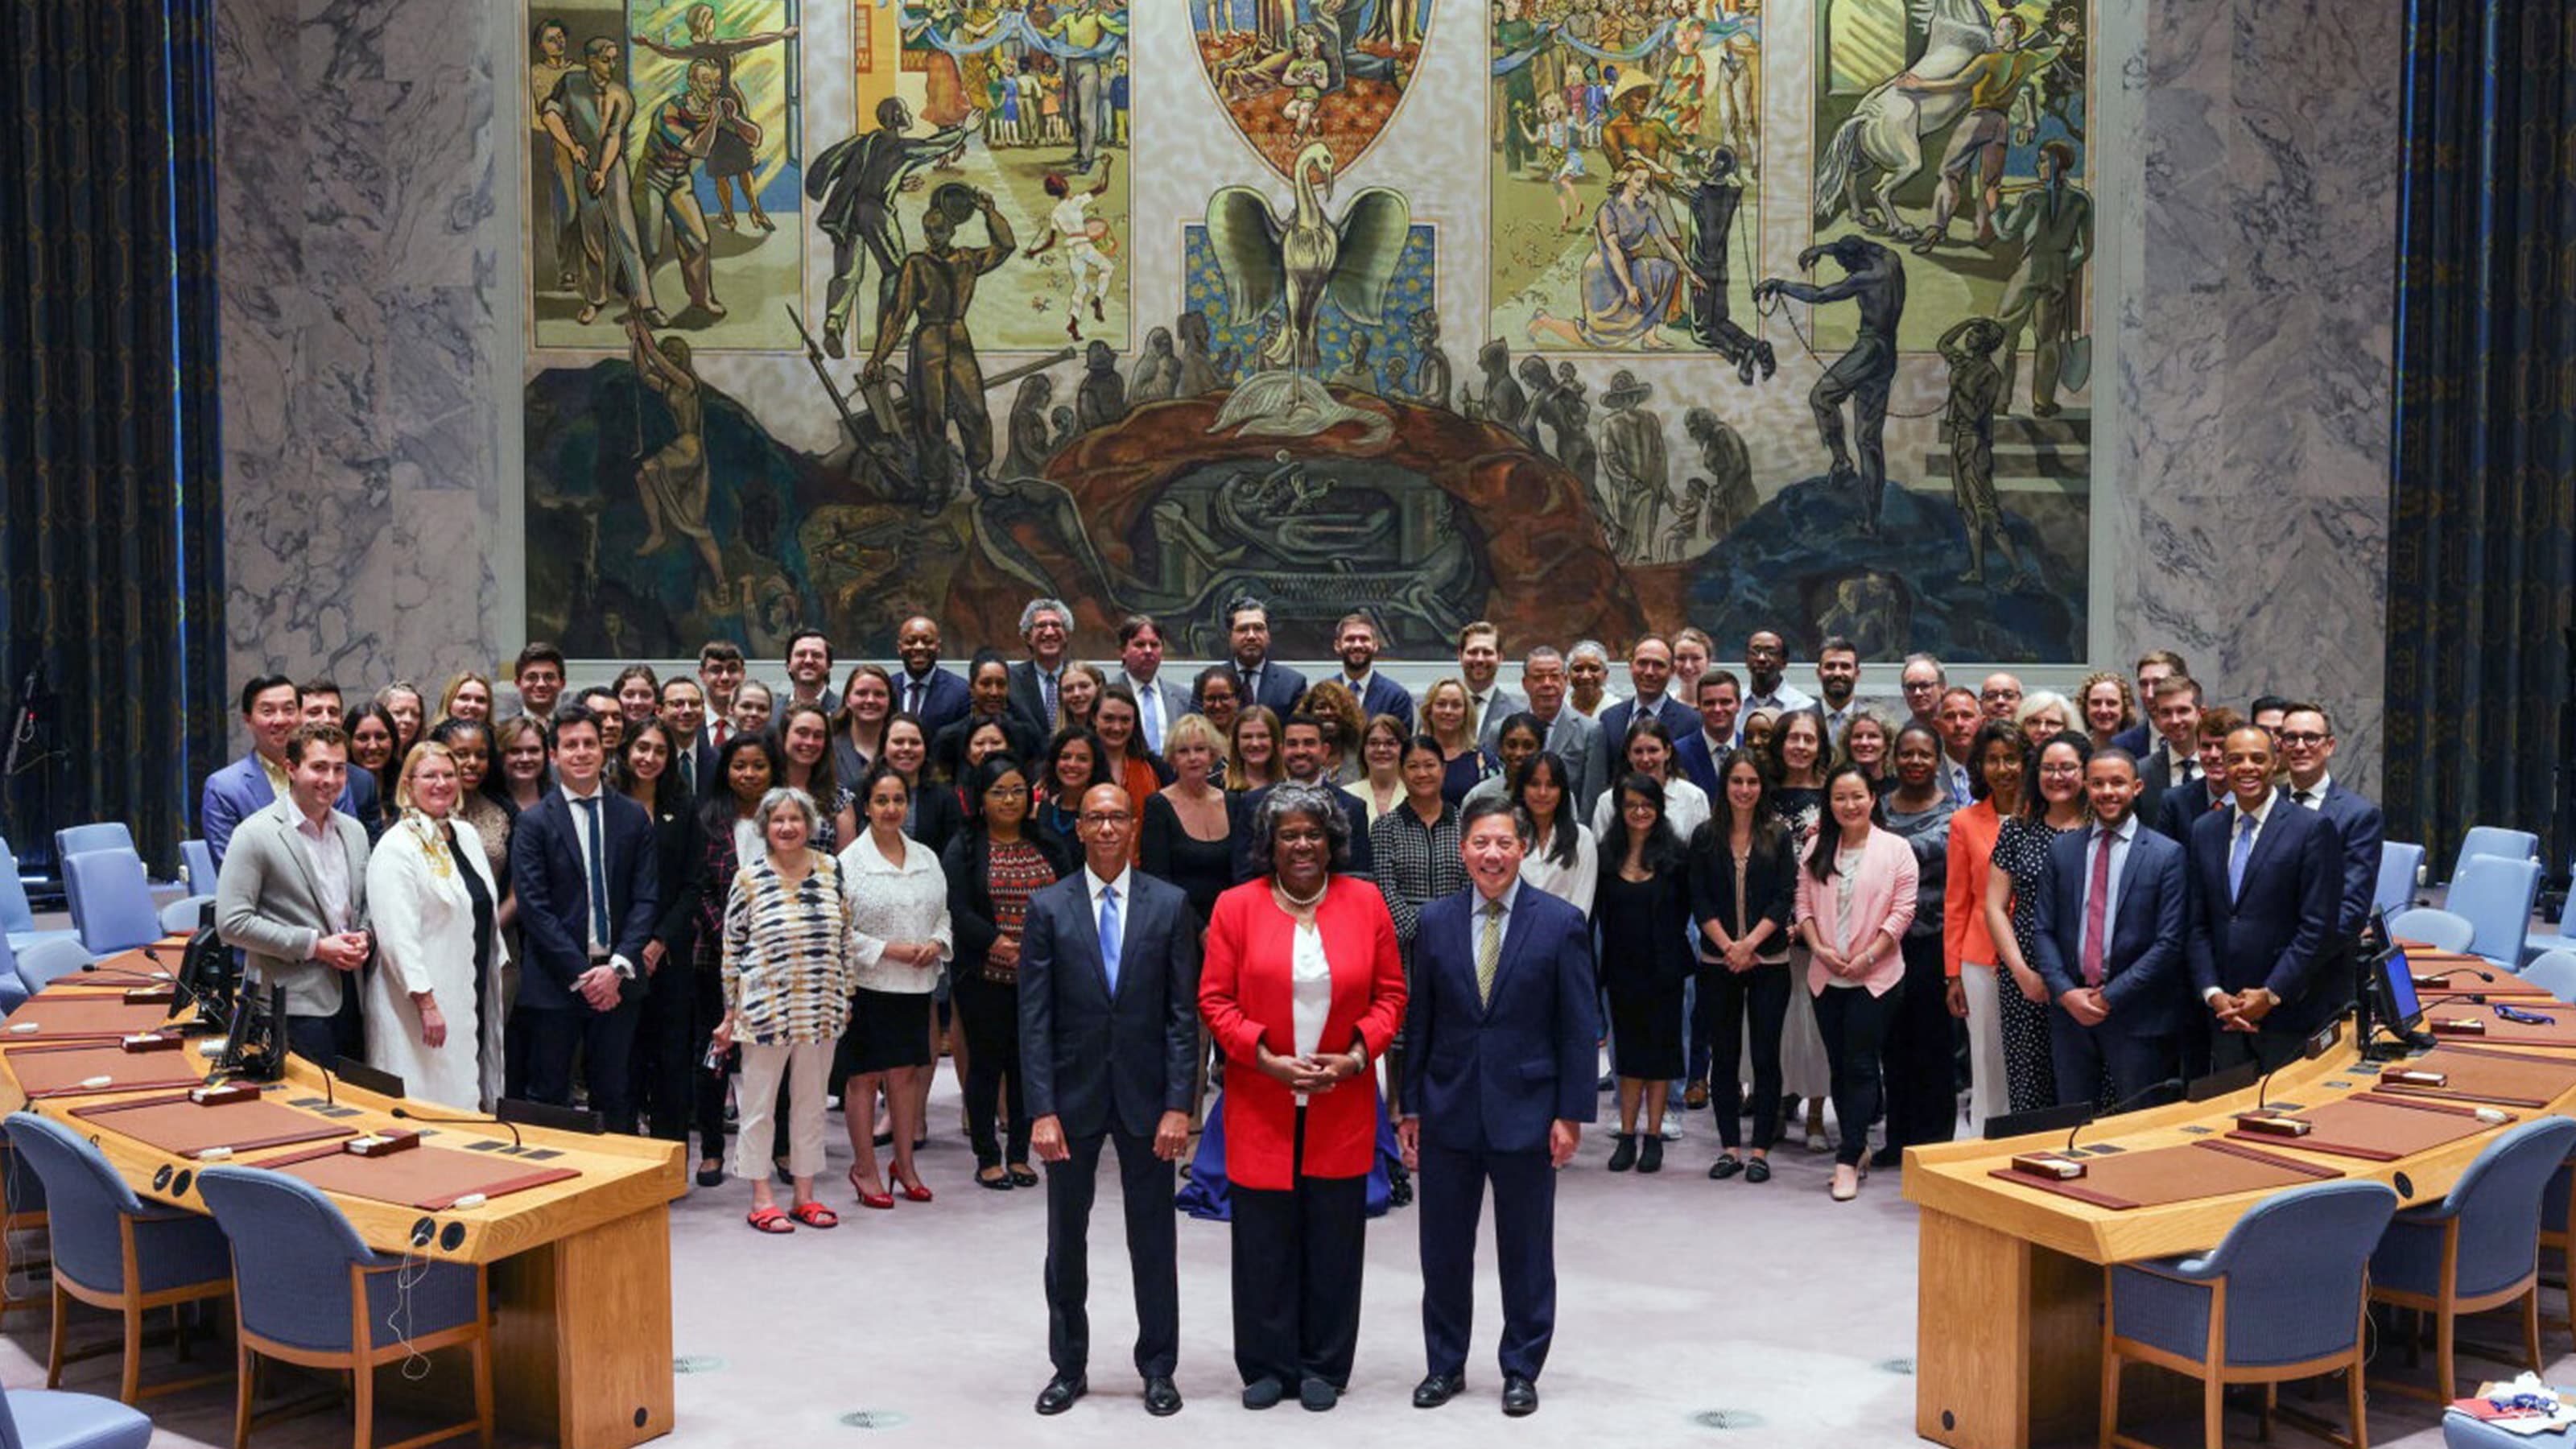 A group of interns posed together at the UN